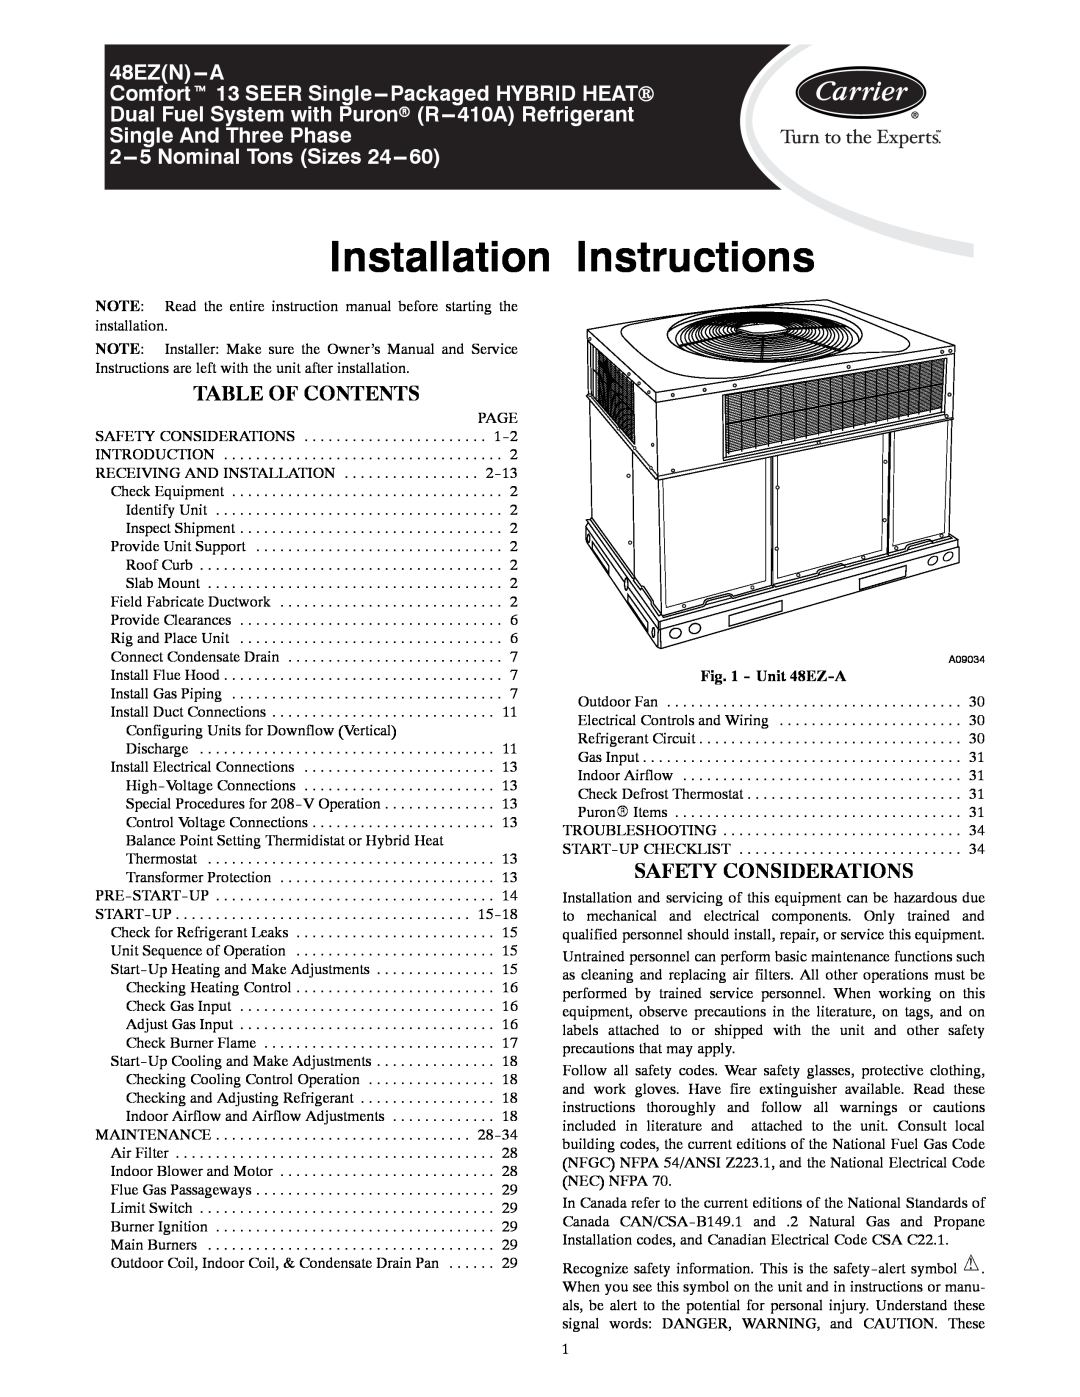 Carrier installation instructions Table Of Contents, Safety Considerations, Unit 48EZ-A, Installation Instructions 